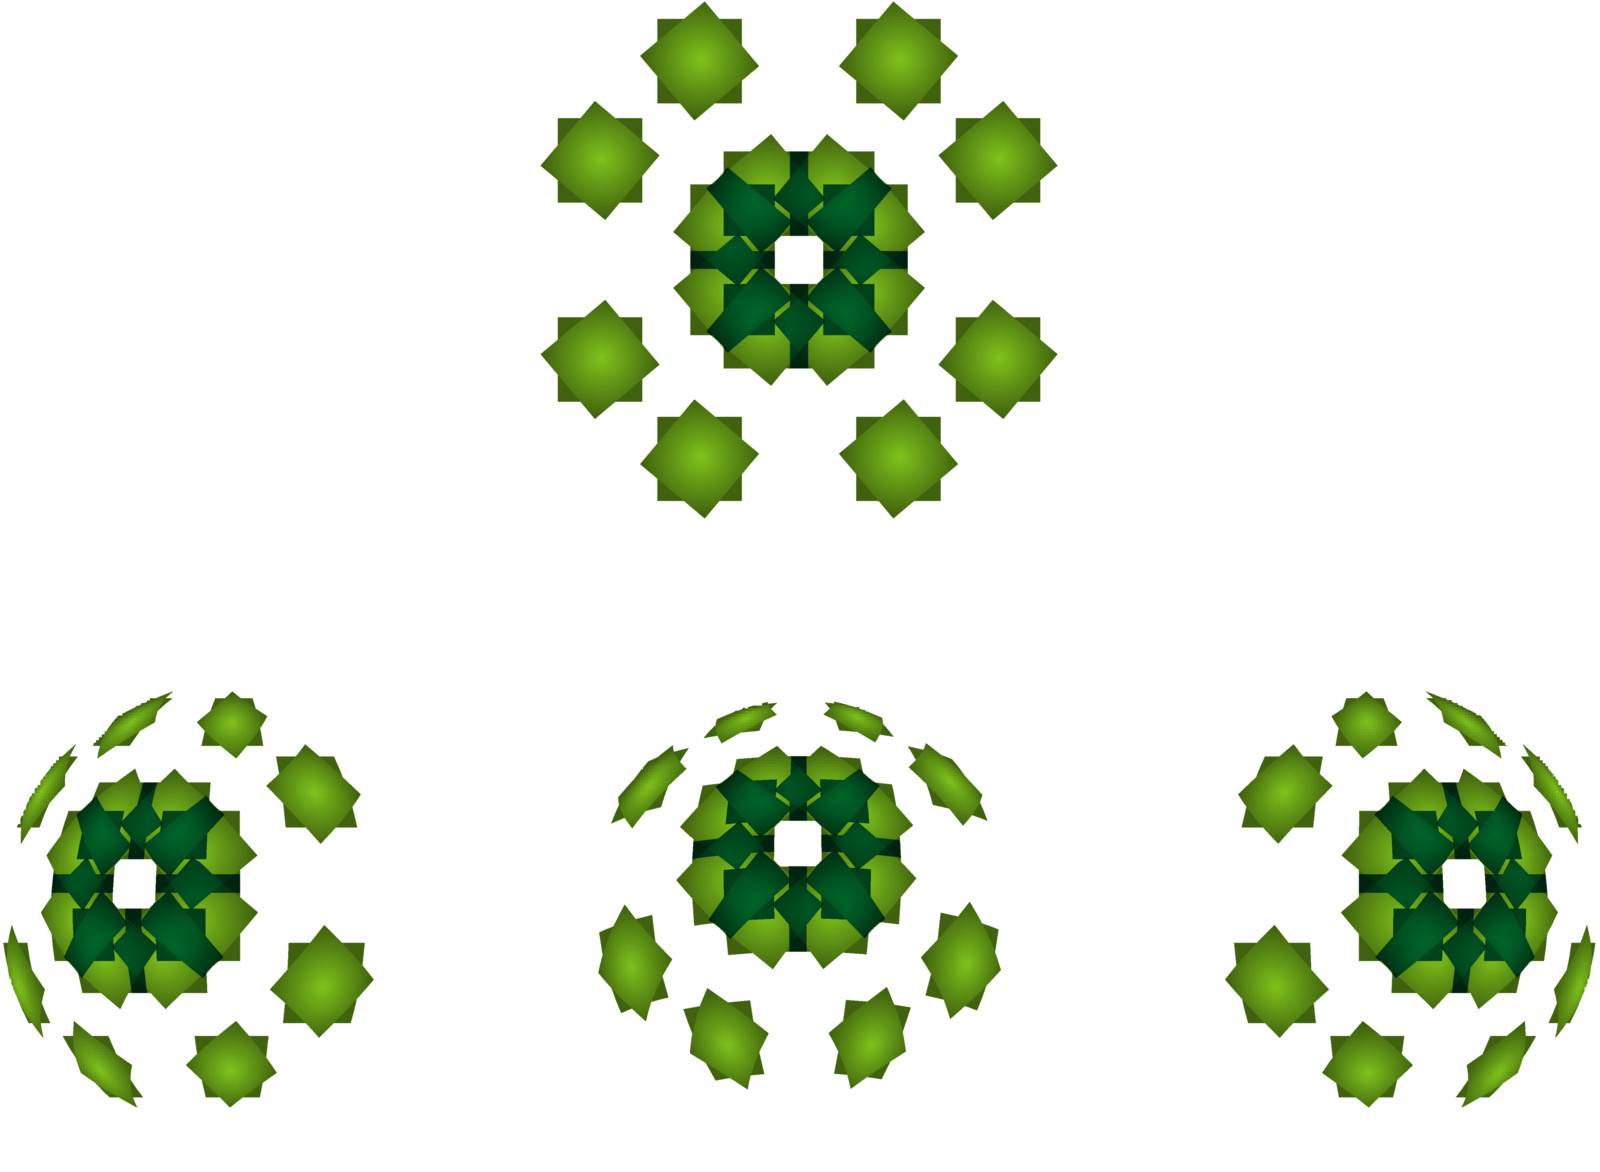 Set of four 3d green sphere graphic elements.